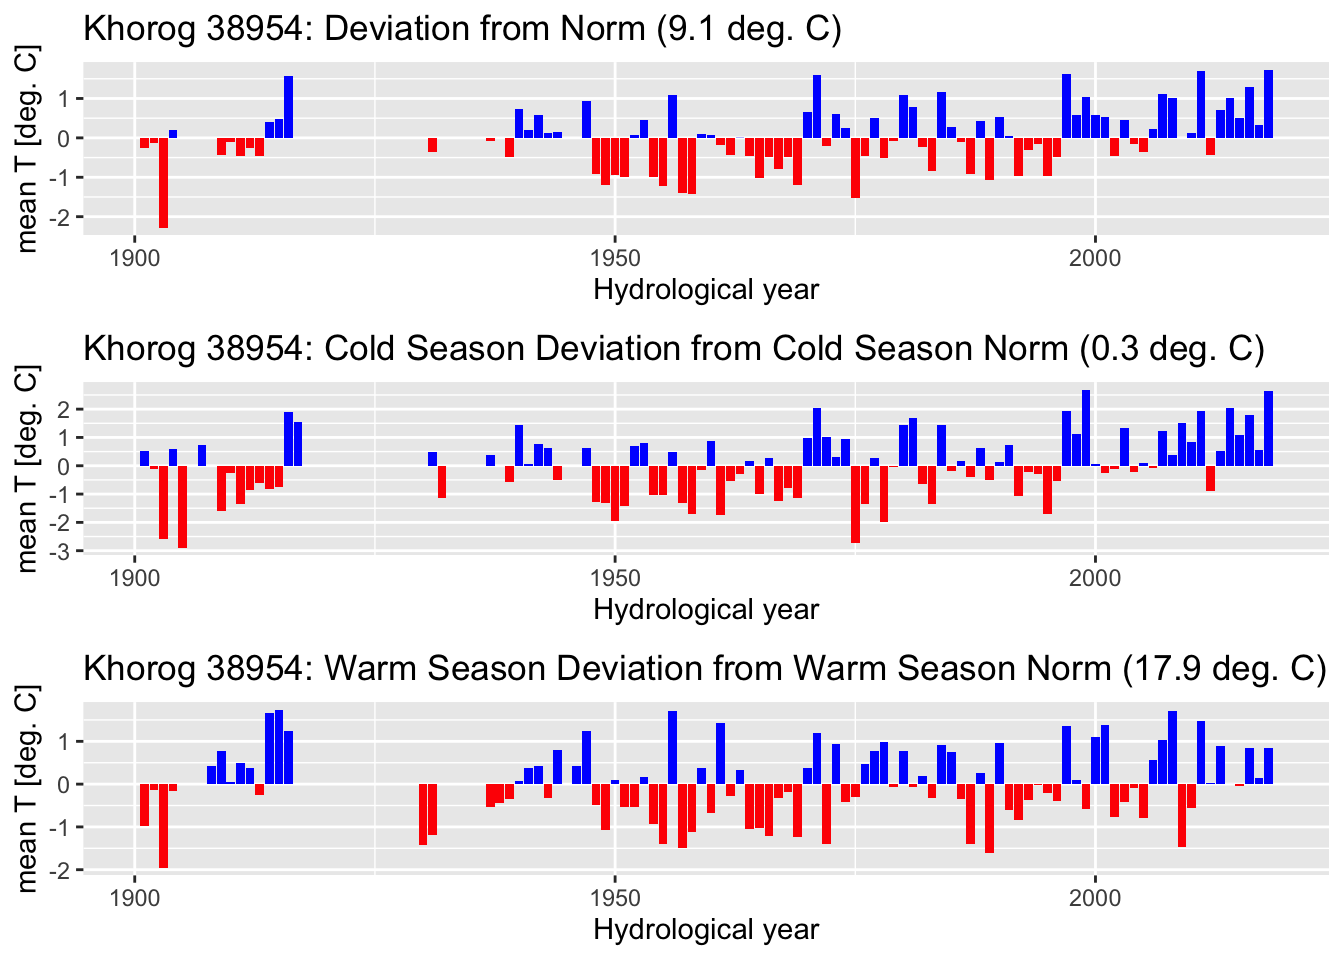 Annual devations from the norm of the mean temperature for the Khorog station 38954 record are shown for the entire hydrological year and for the corresponding cold and warm seasons. Note that the entire data record is taken into account here from the start of the 20th century.